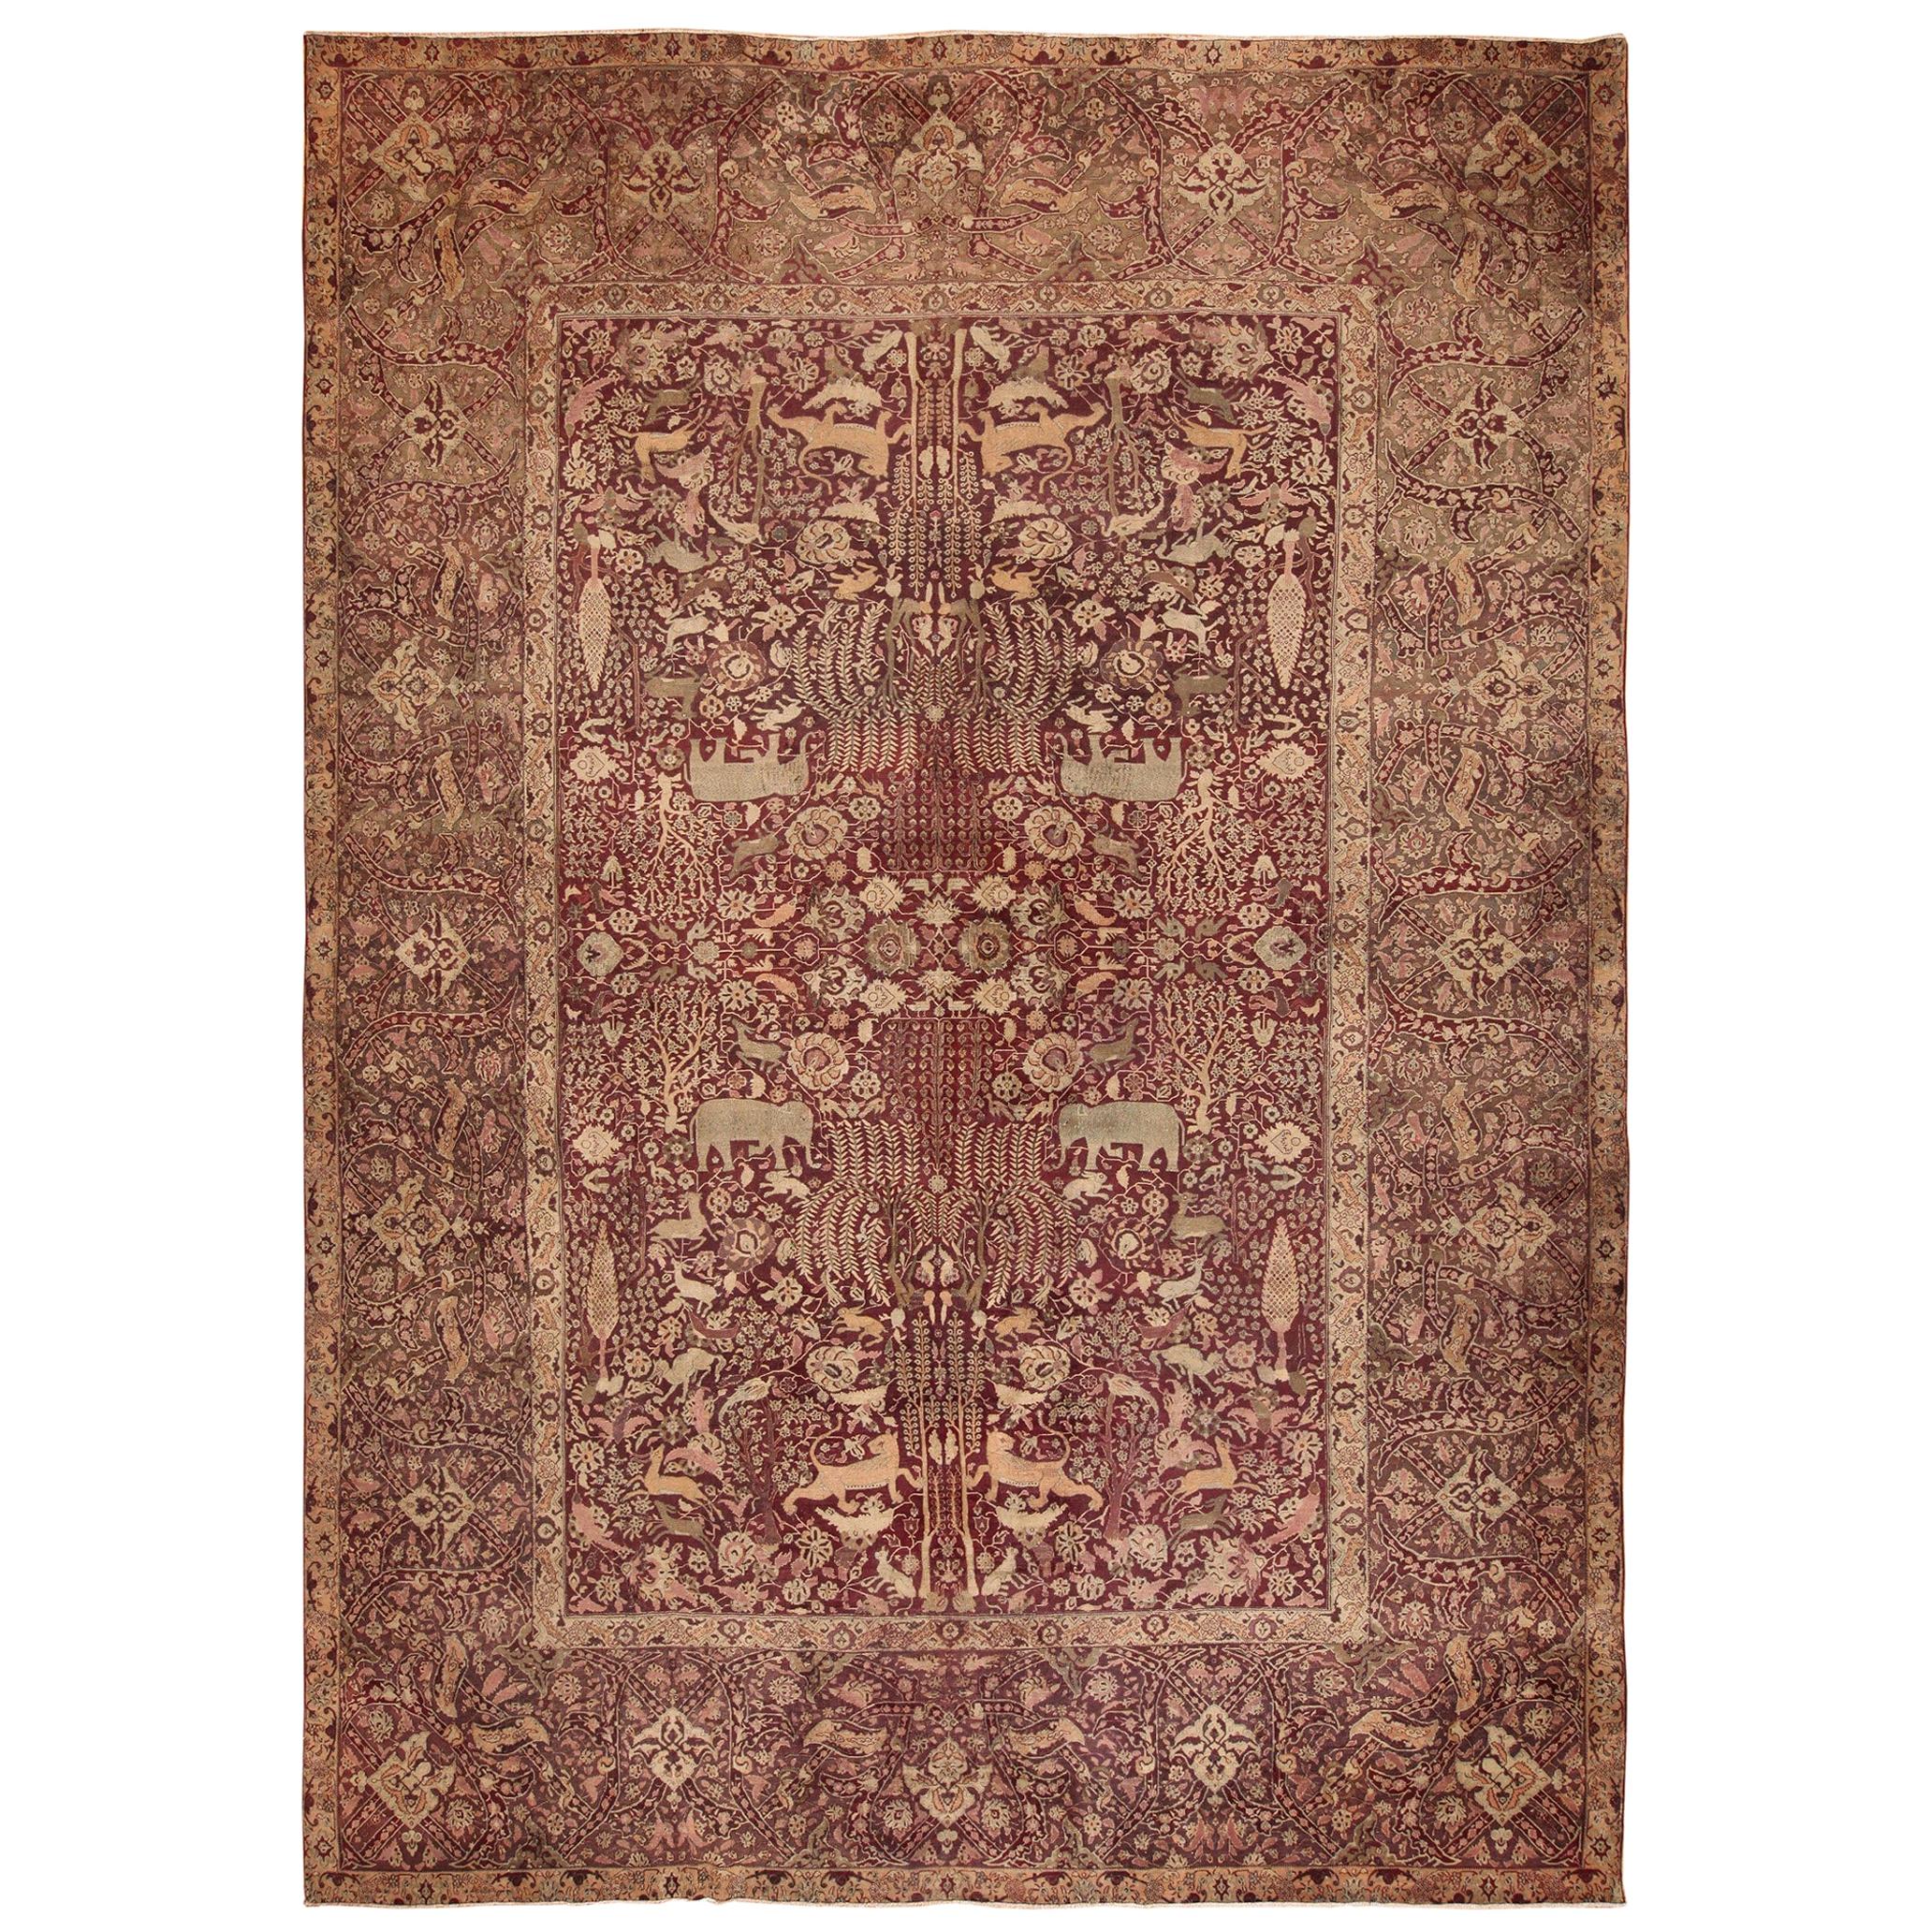 Antique Indian Agra Rug. Size: 11 ft 6 in x 16 ft 9 in